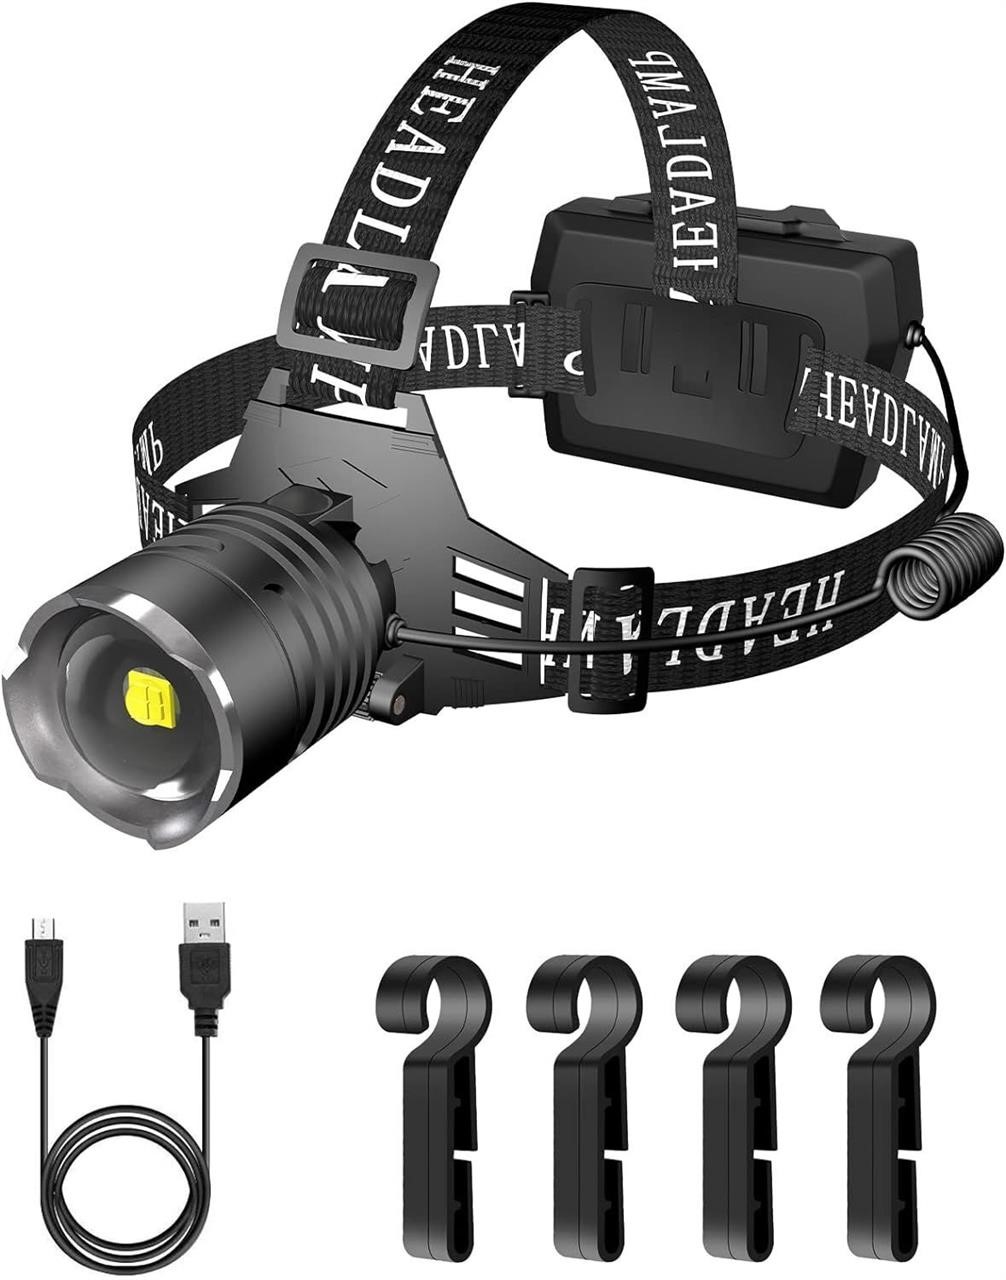 NEW $40 LED Headlamp USB Rechargeable